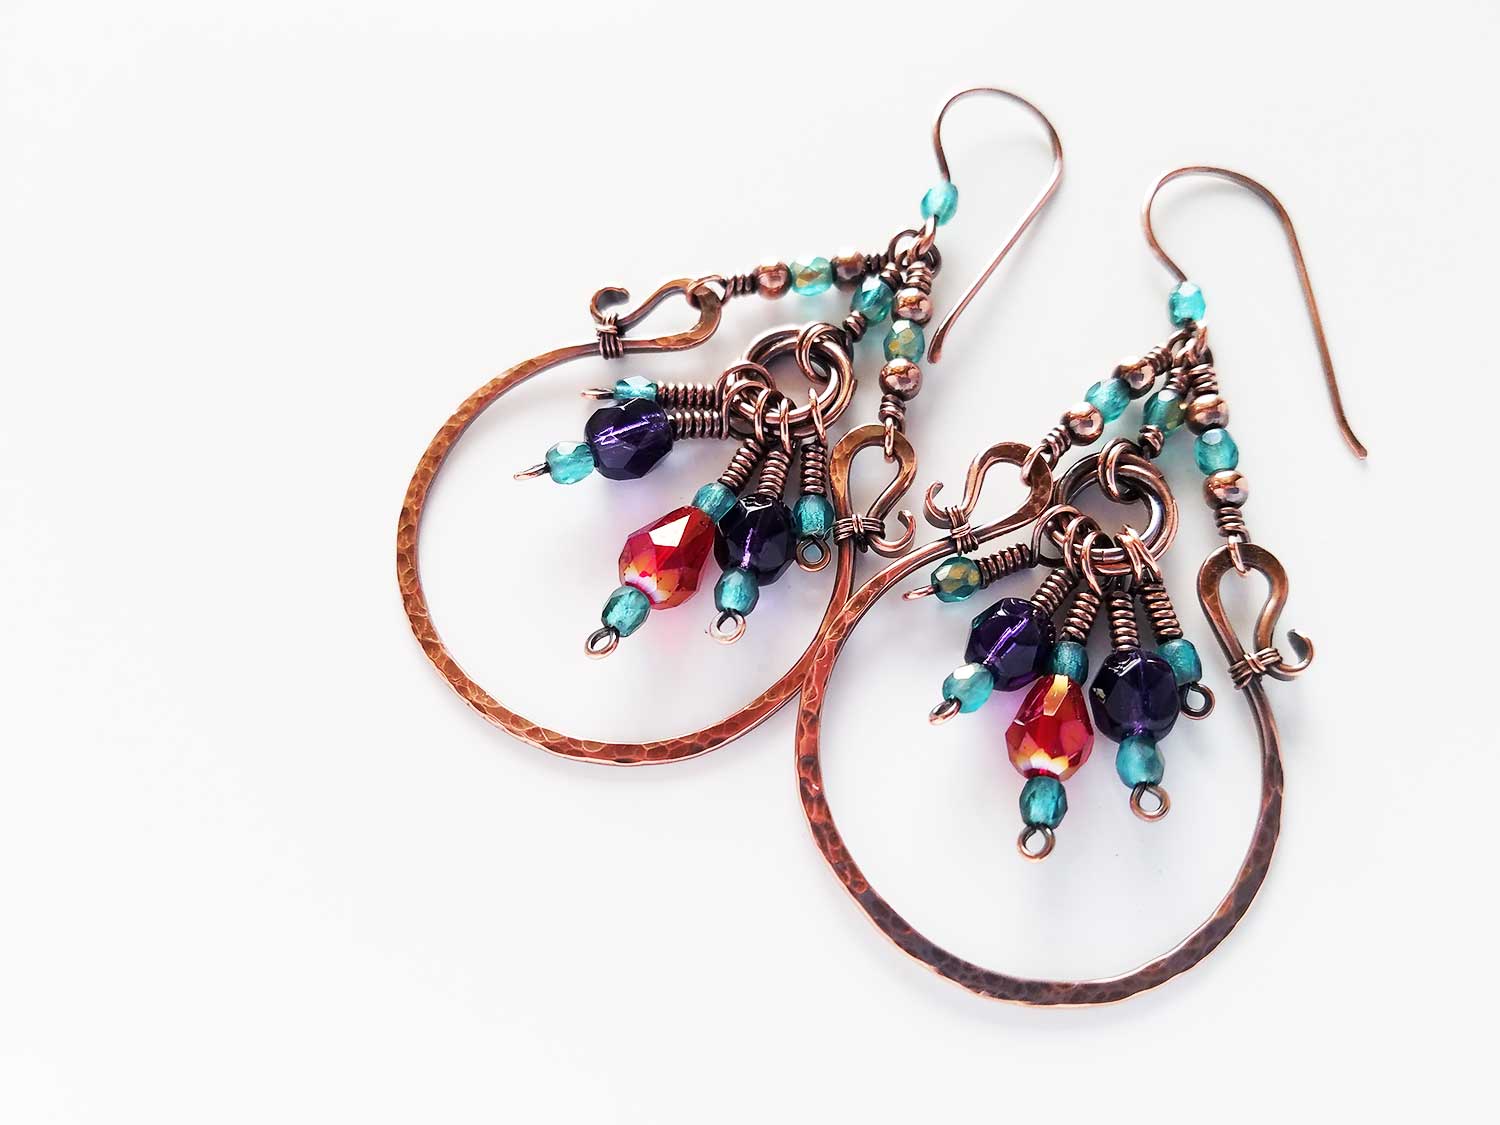 5 Essential Wire Jewelry Techniques That’ll Make You a Better Wire Weaver